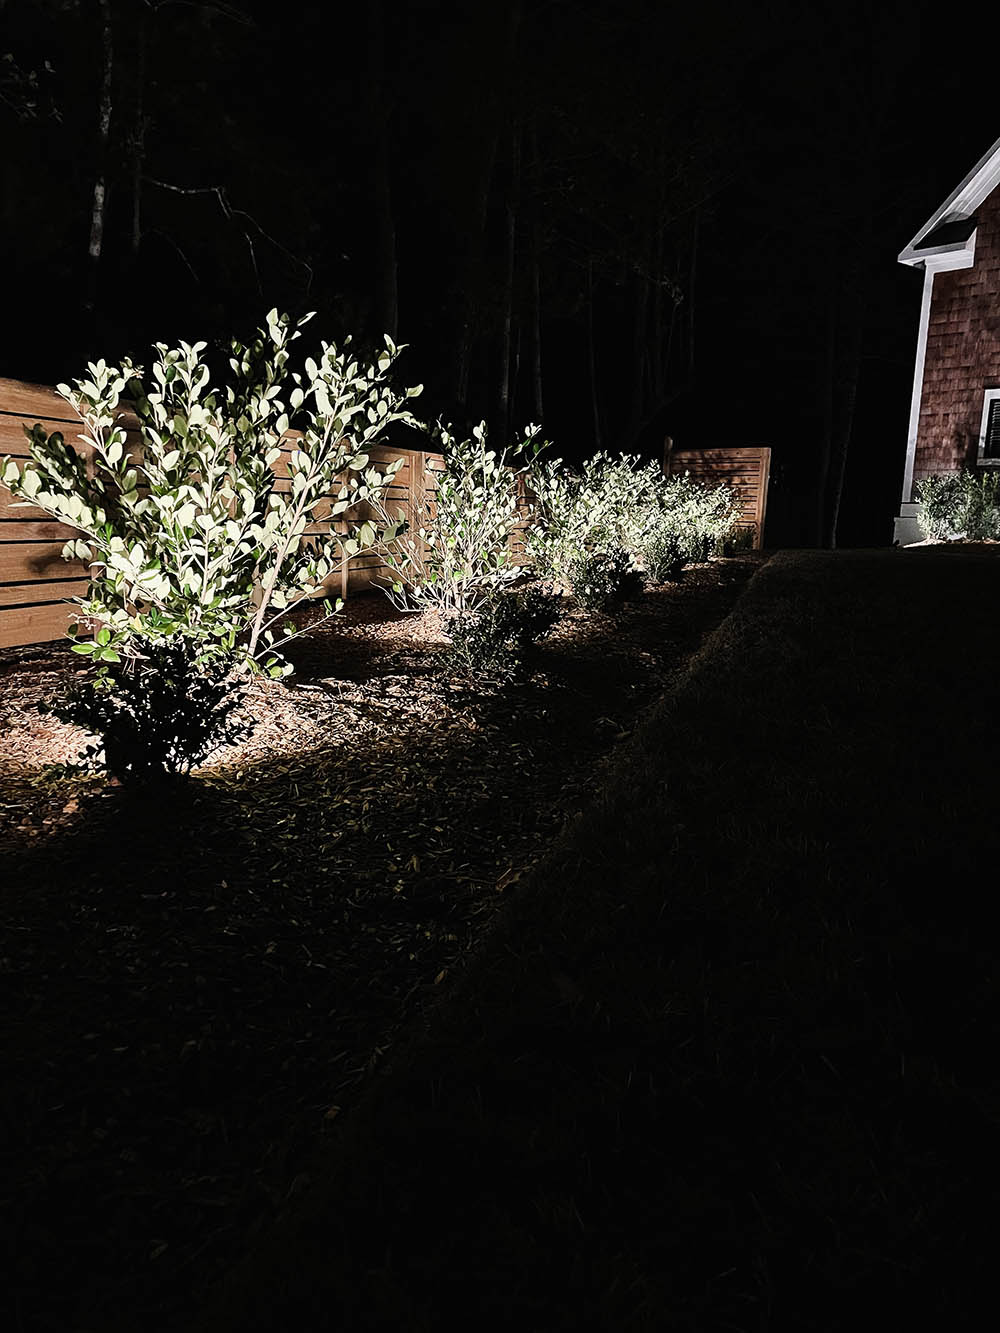 Bushes at night being lit by small outdoor lights.